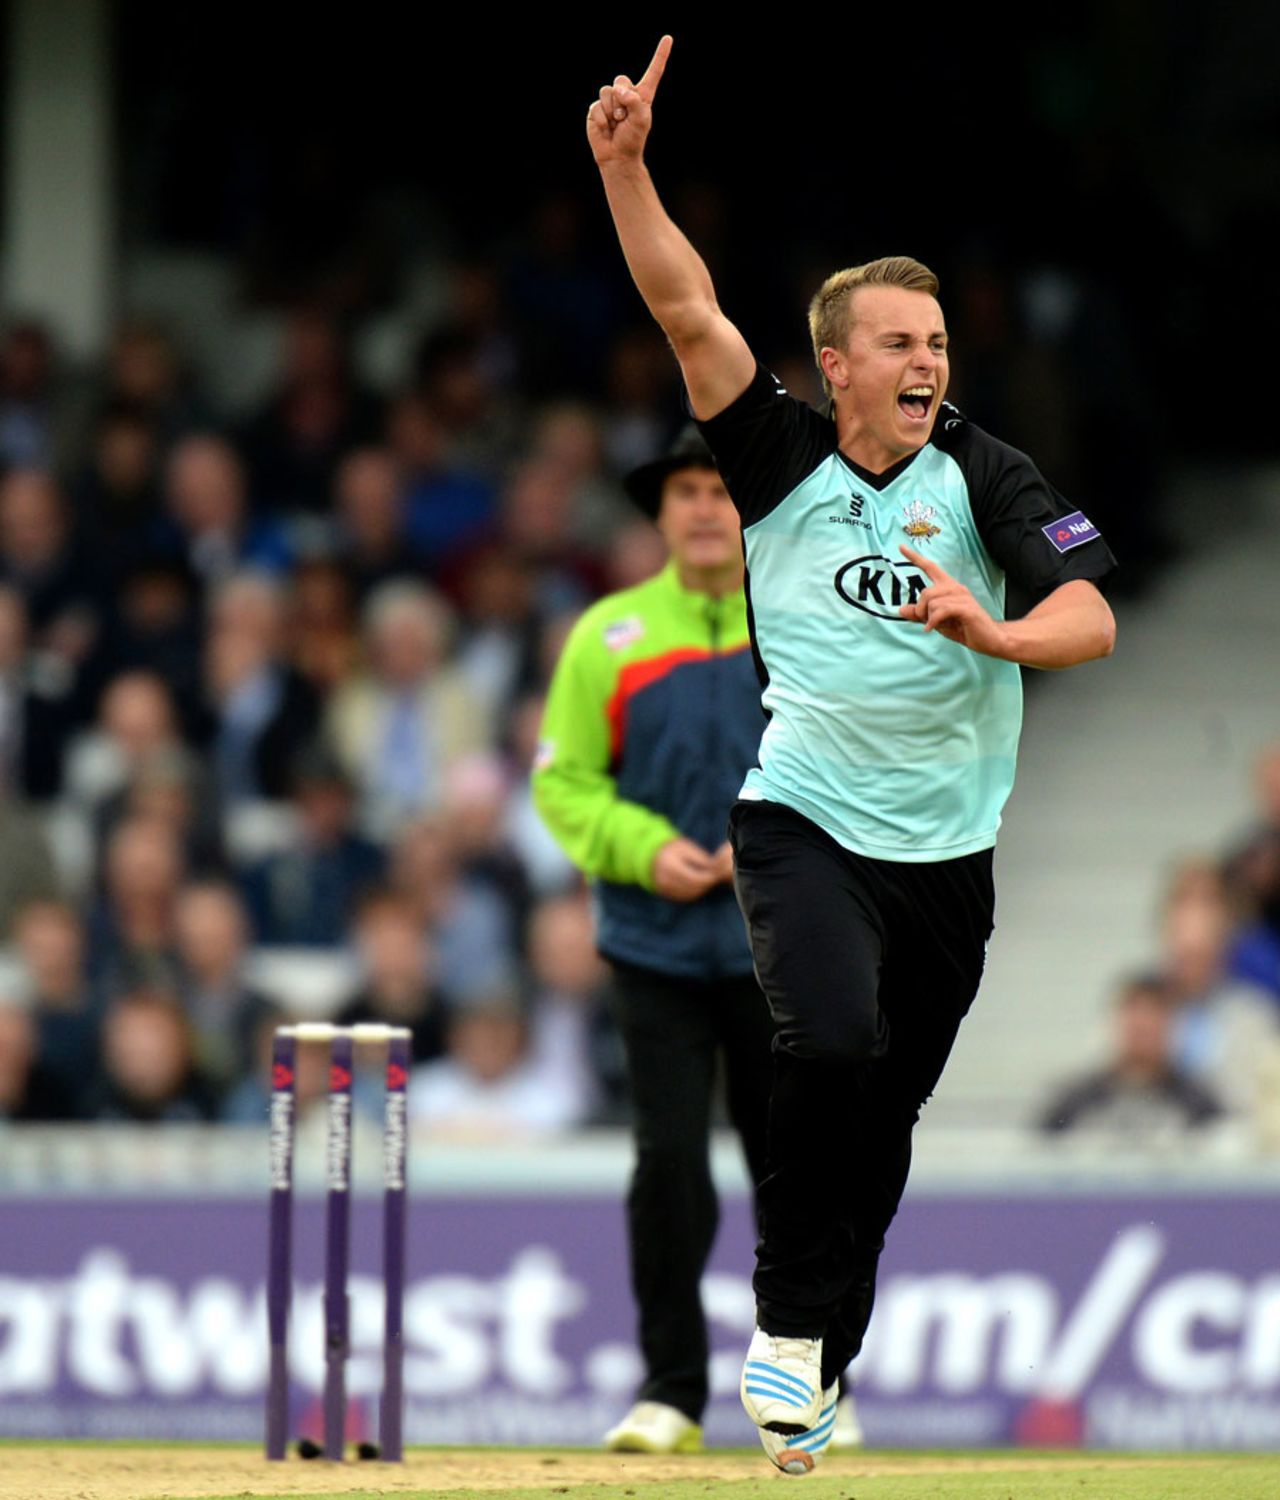 Tom Curran produced a fine spell of 2 for 15, Surrey v Middlesex, NatWest T20 Blast, South Division, The Oval, May 30, 2014